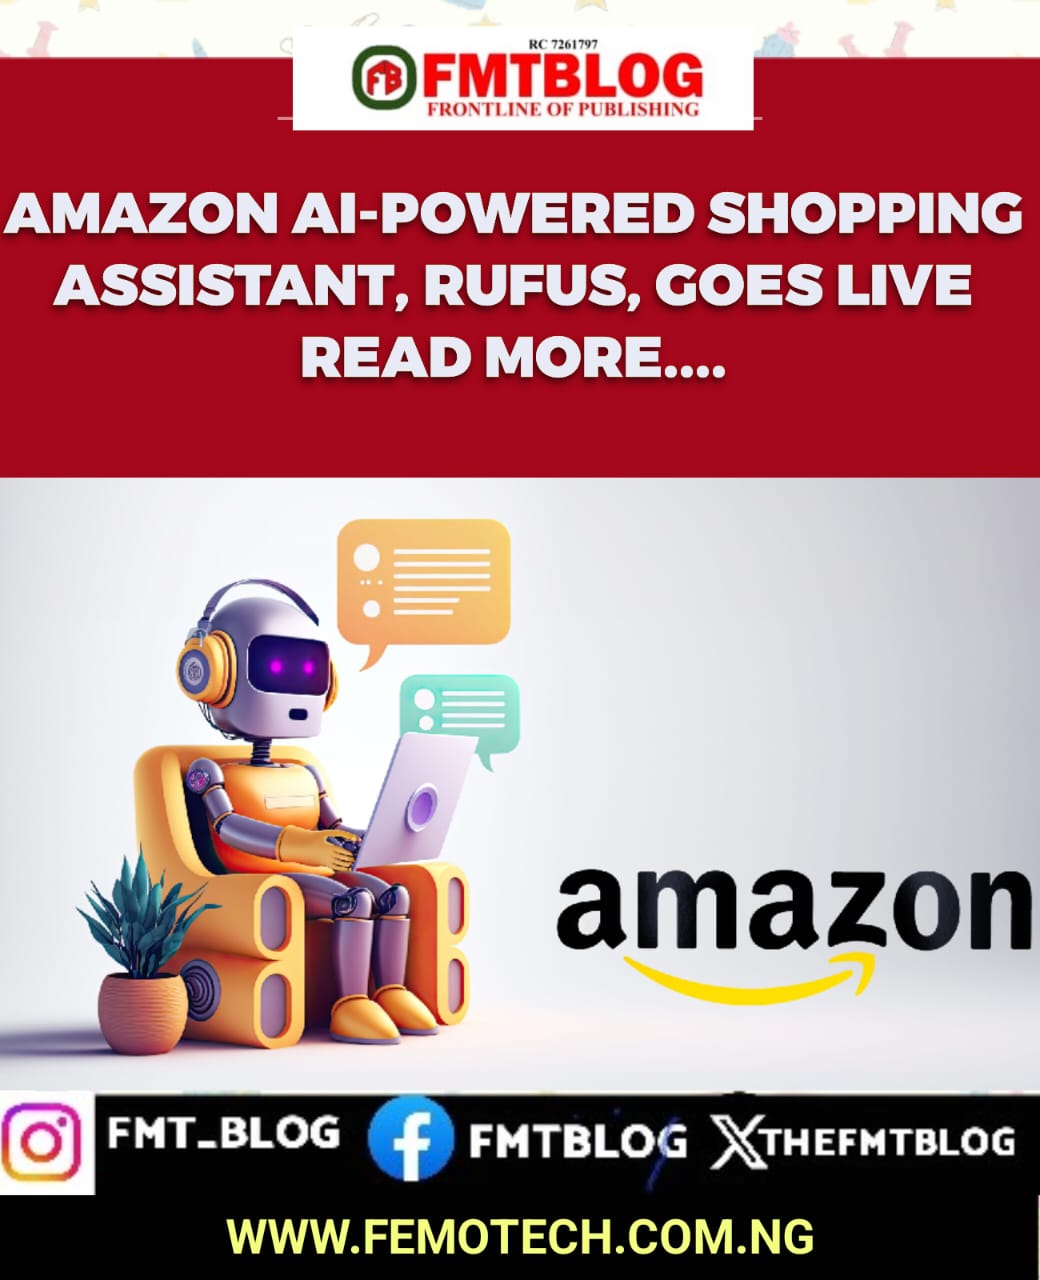 Amazon AI-Powered Shopping Assistant, RUFUS Goes Live